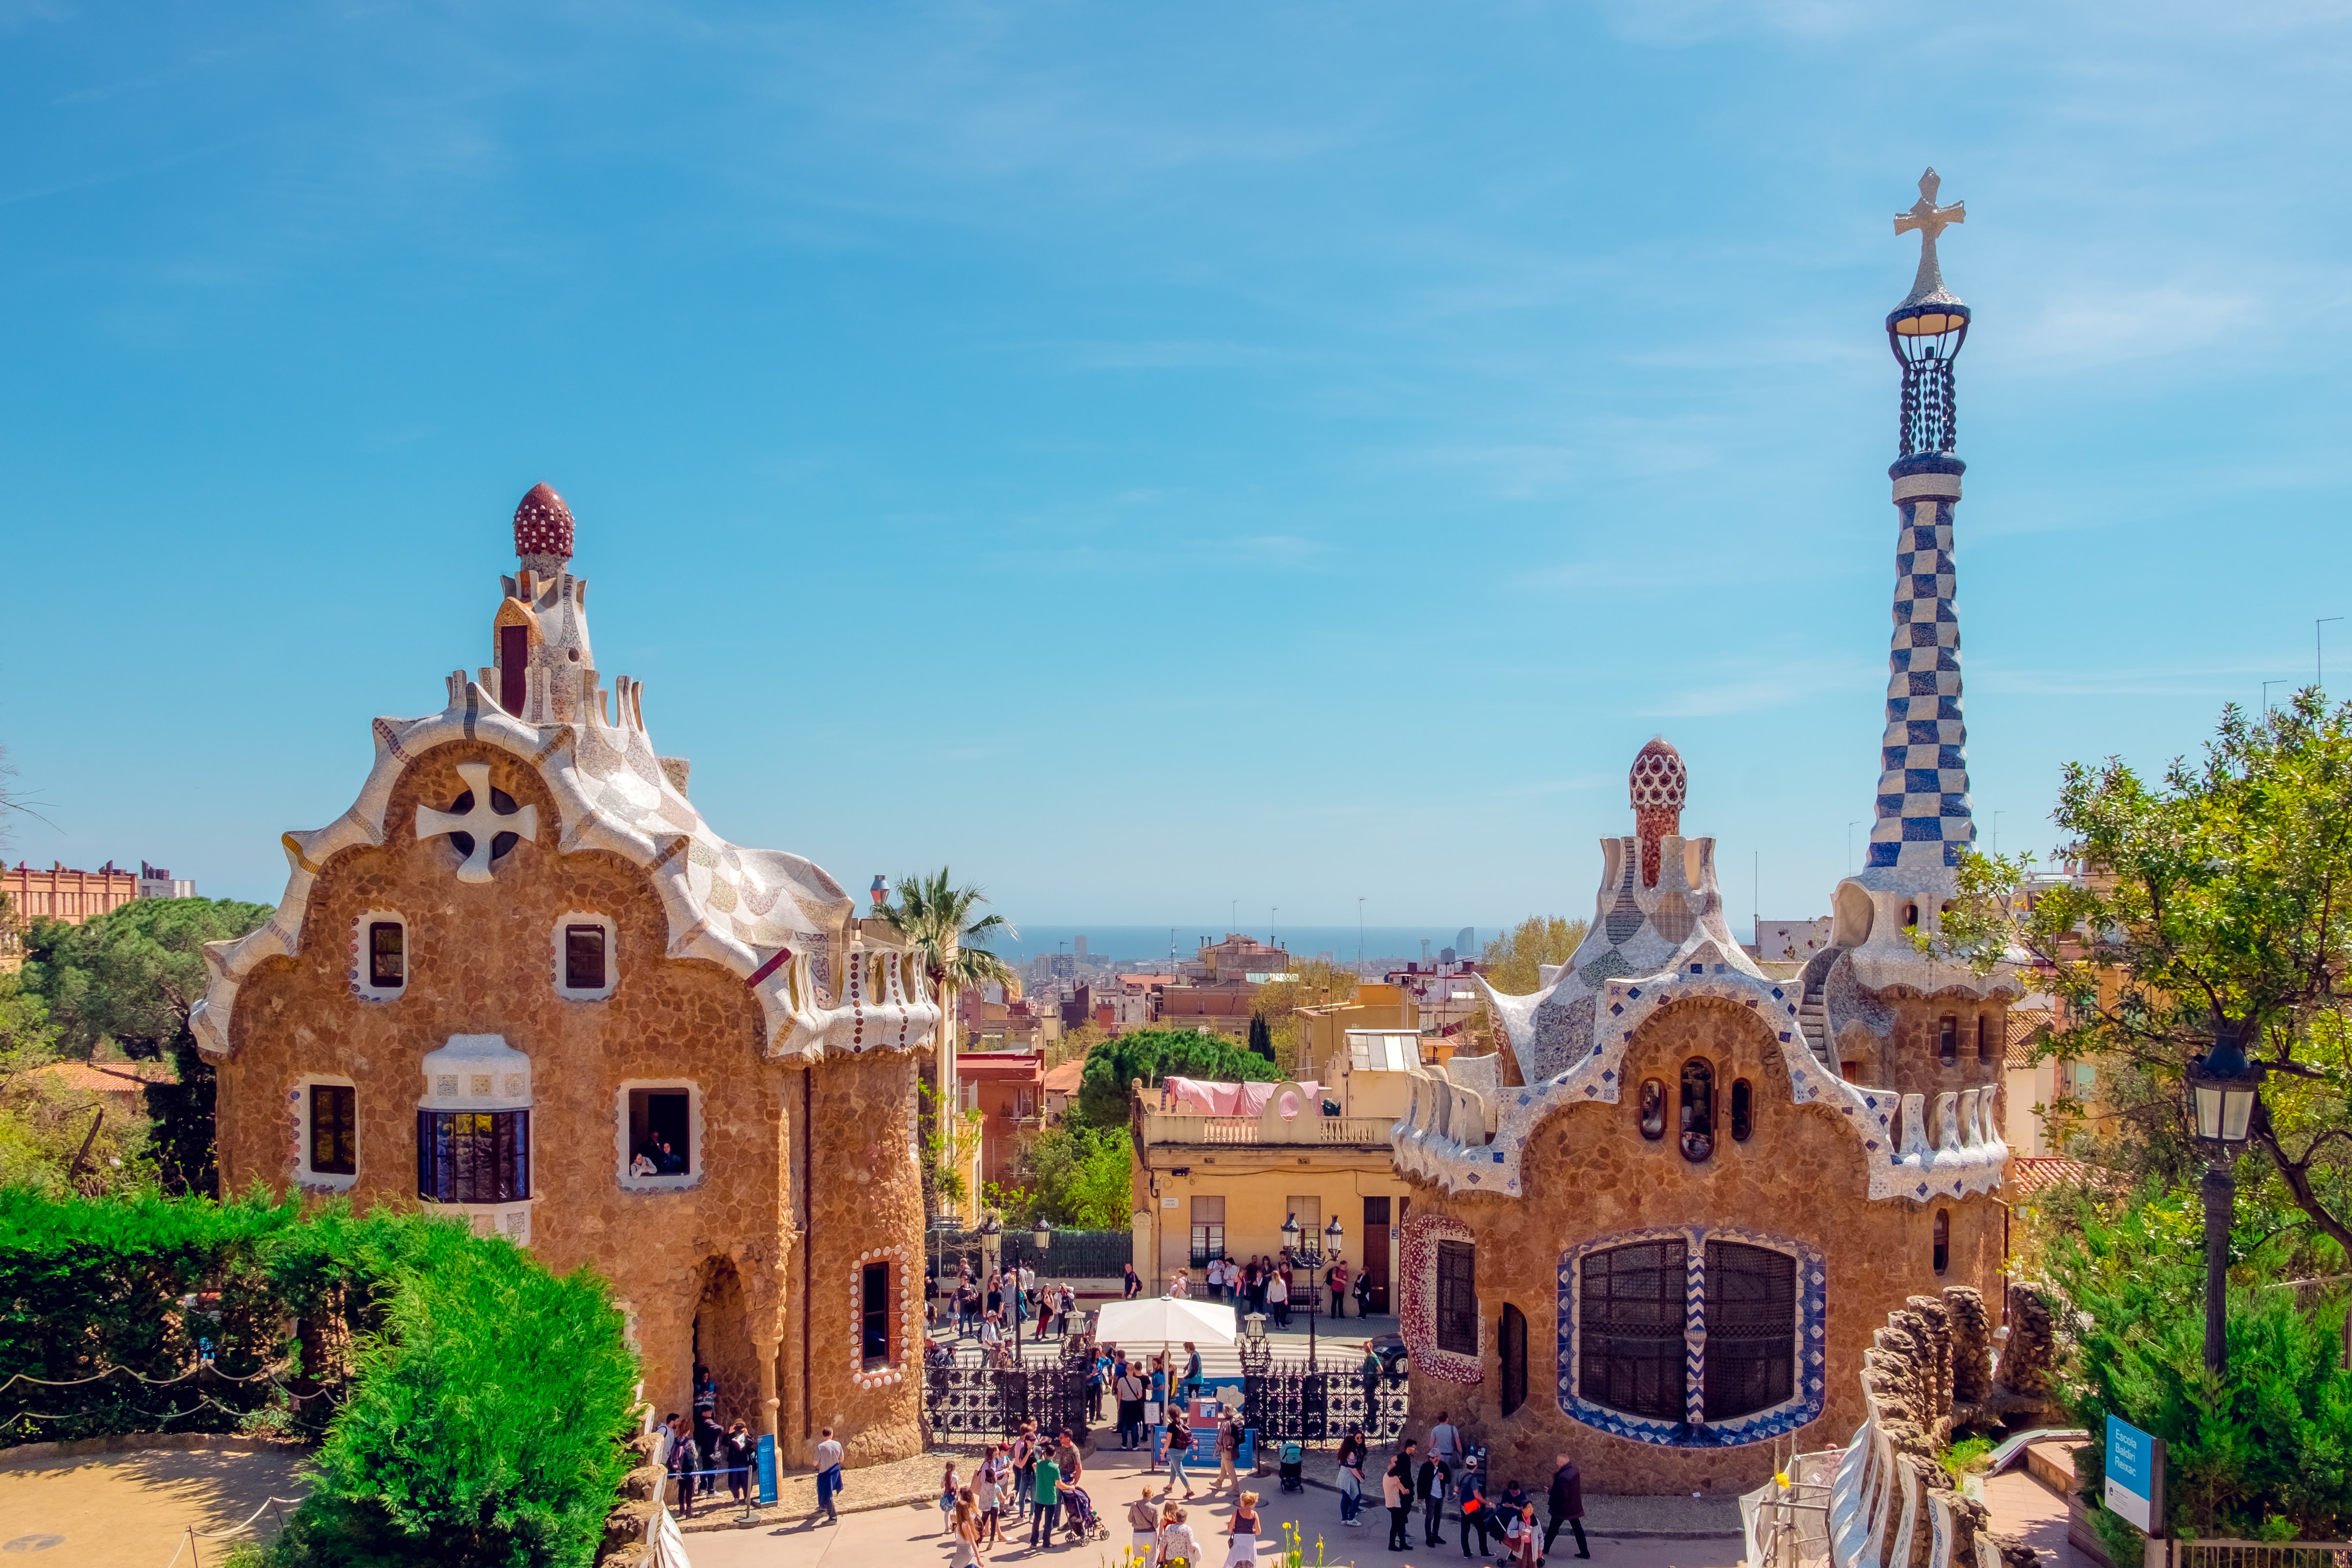 Colorful architecture under blue skies in Barcelona beautiful city parks